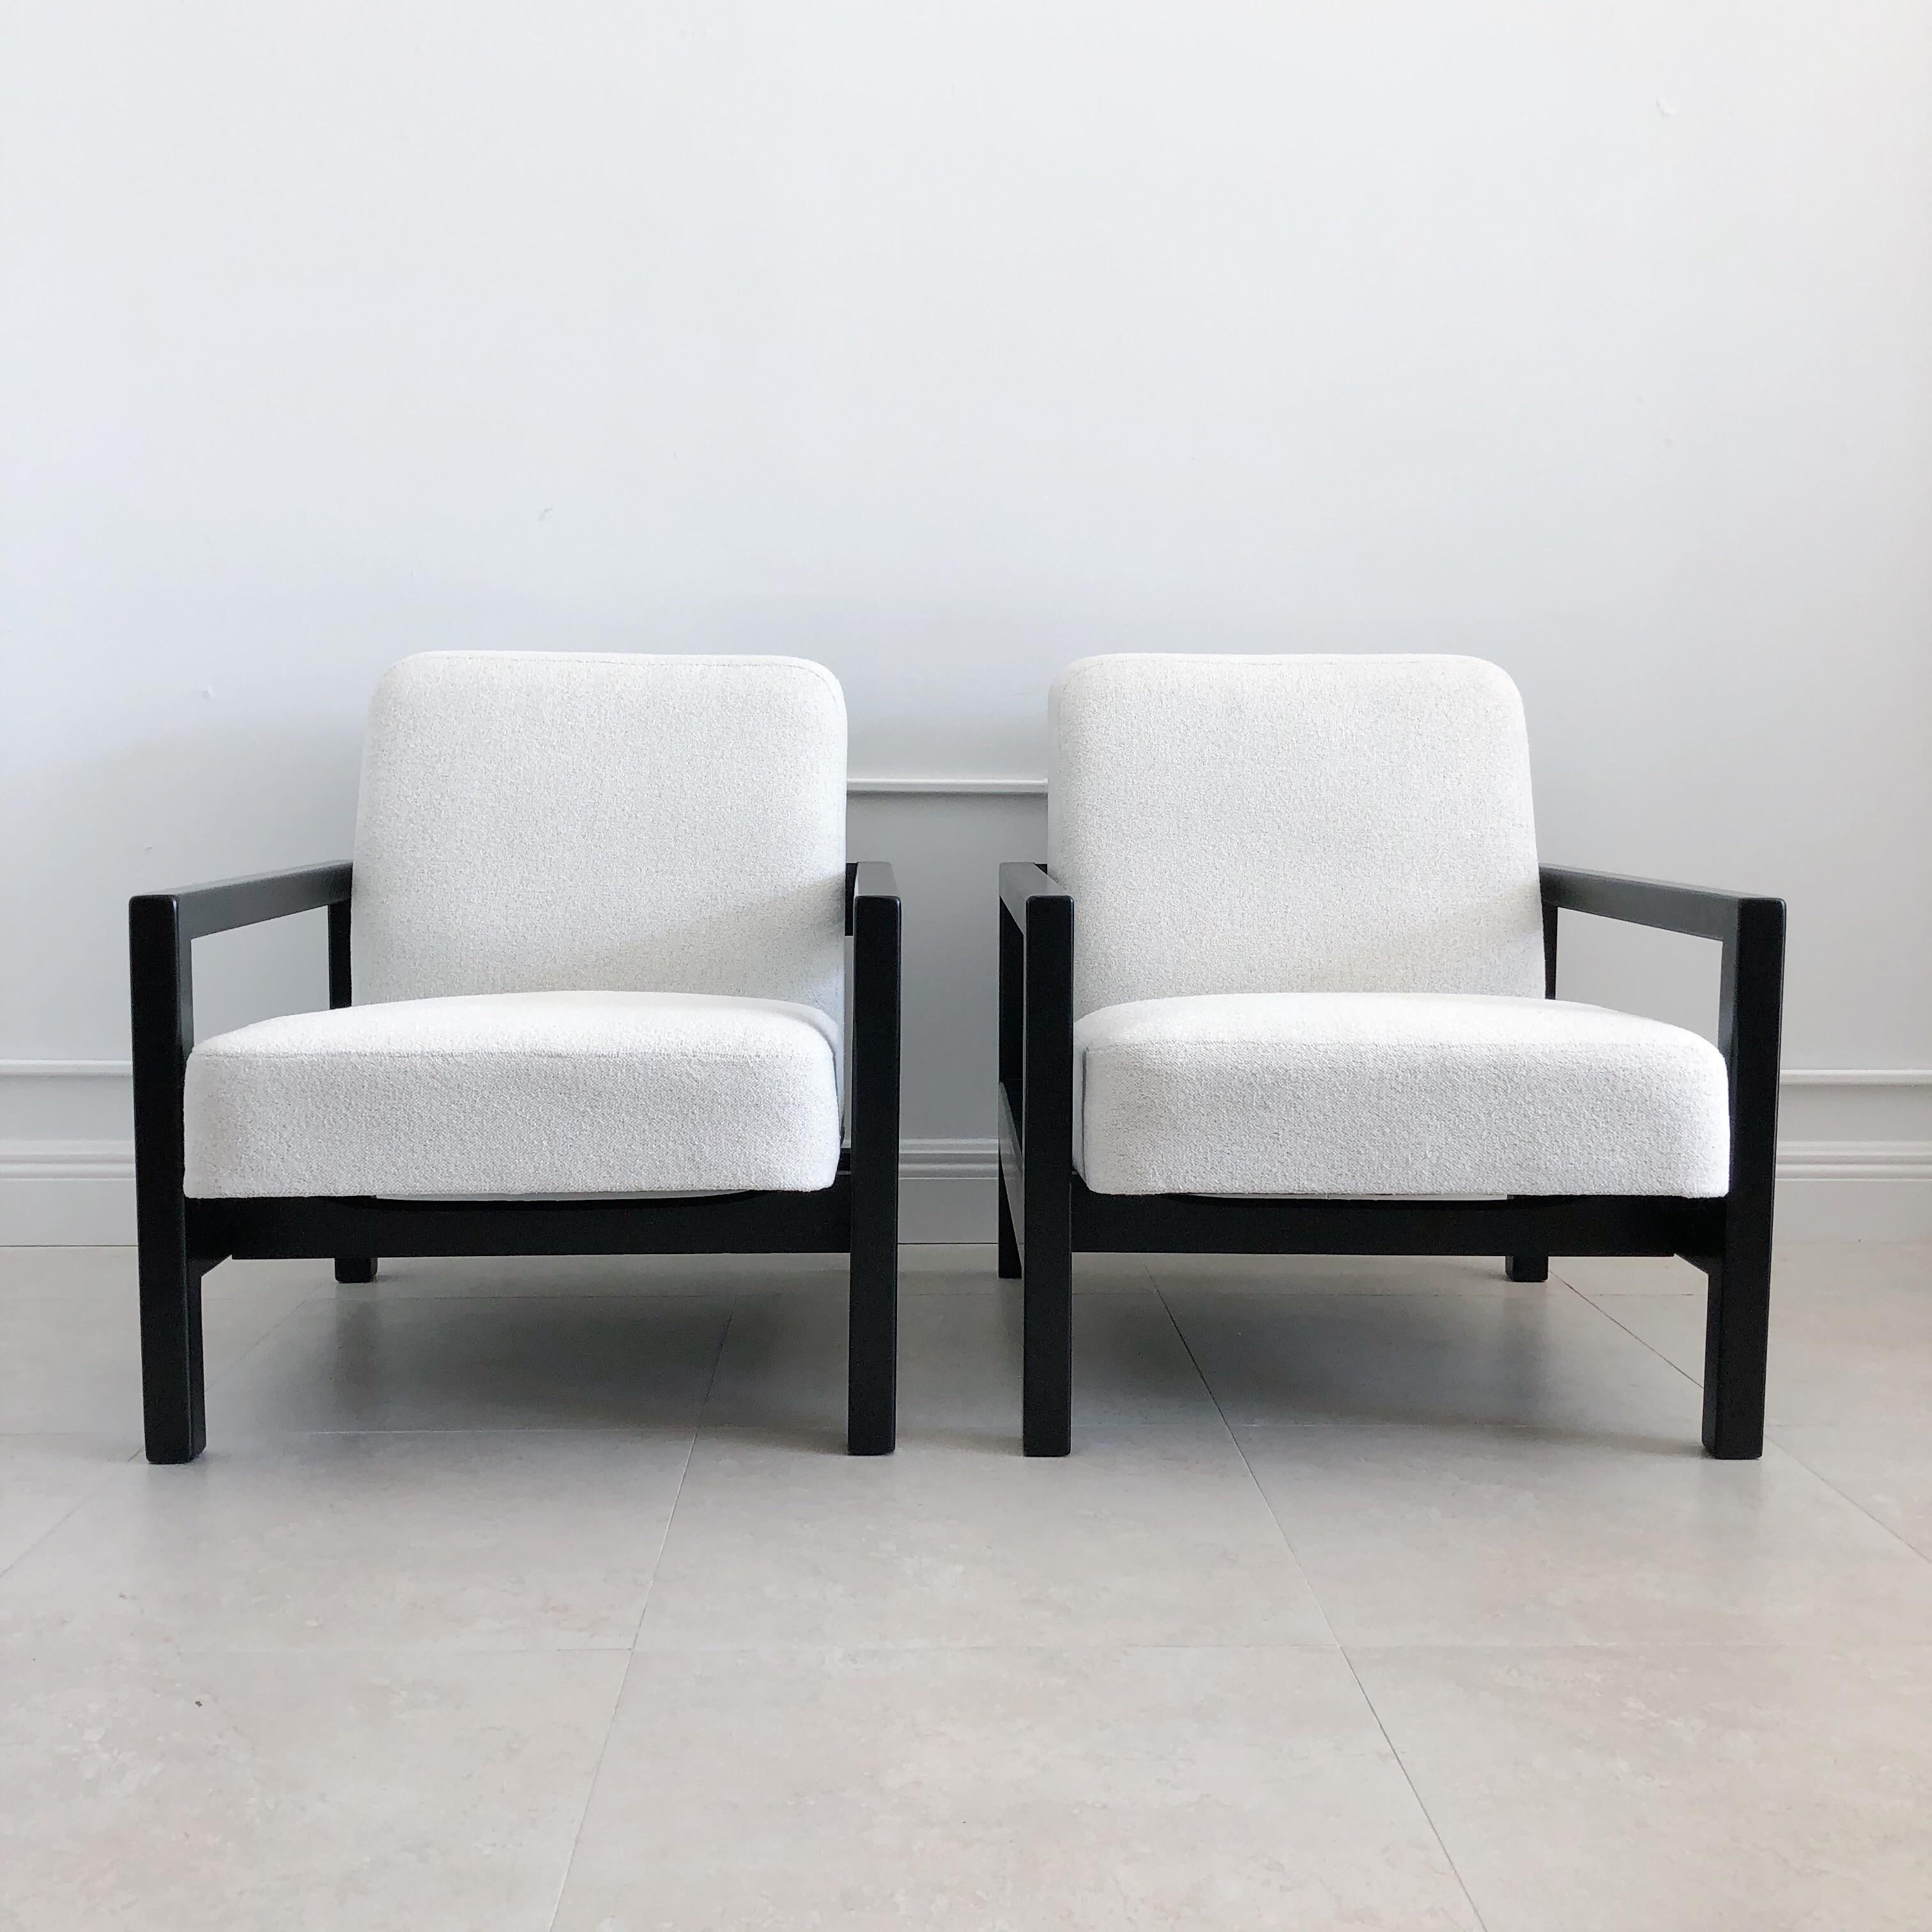 Designed by George Nelson for Herman Miller, these rarely seen armchairs, model 4774, feature an open rectilinear frame in ebonized birch and a deeply comfortable upholstered seat and back. These have been newly reupholstered in boucle fabric, with